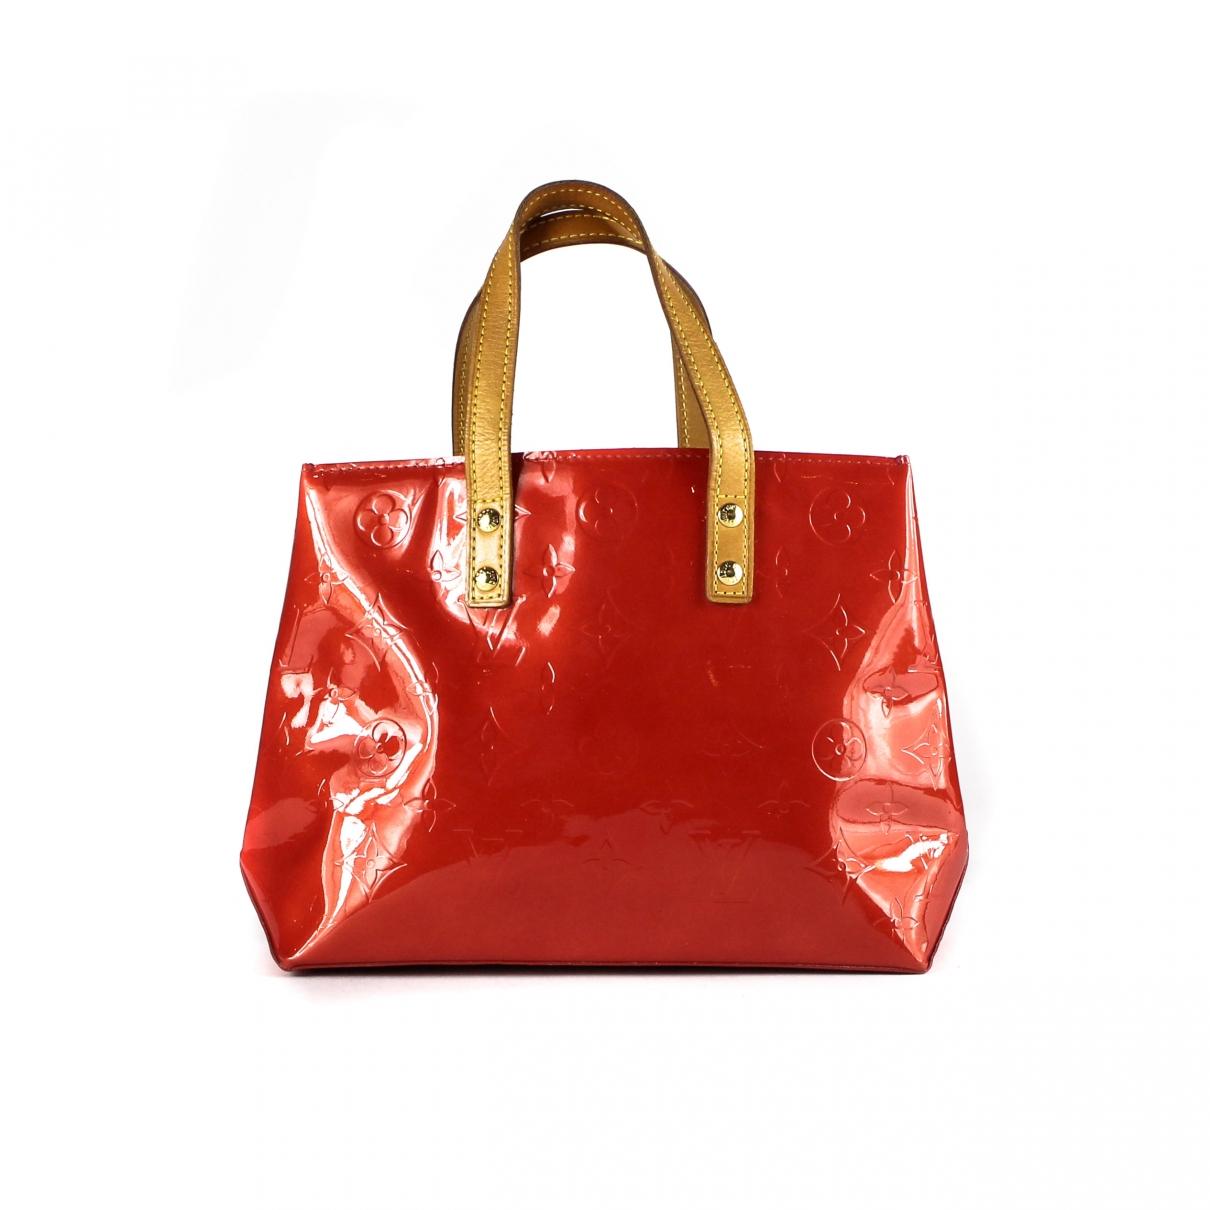 Lyst - Louis Vuitton Vintage Red Patent Leather Handbag in Red